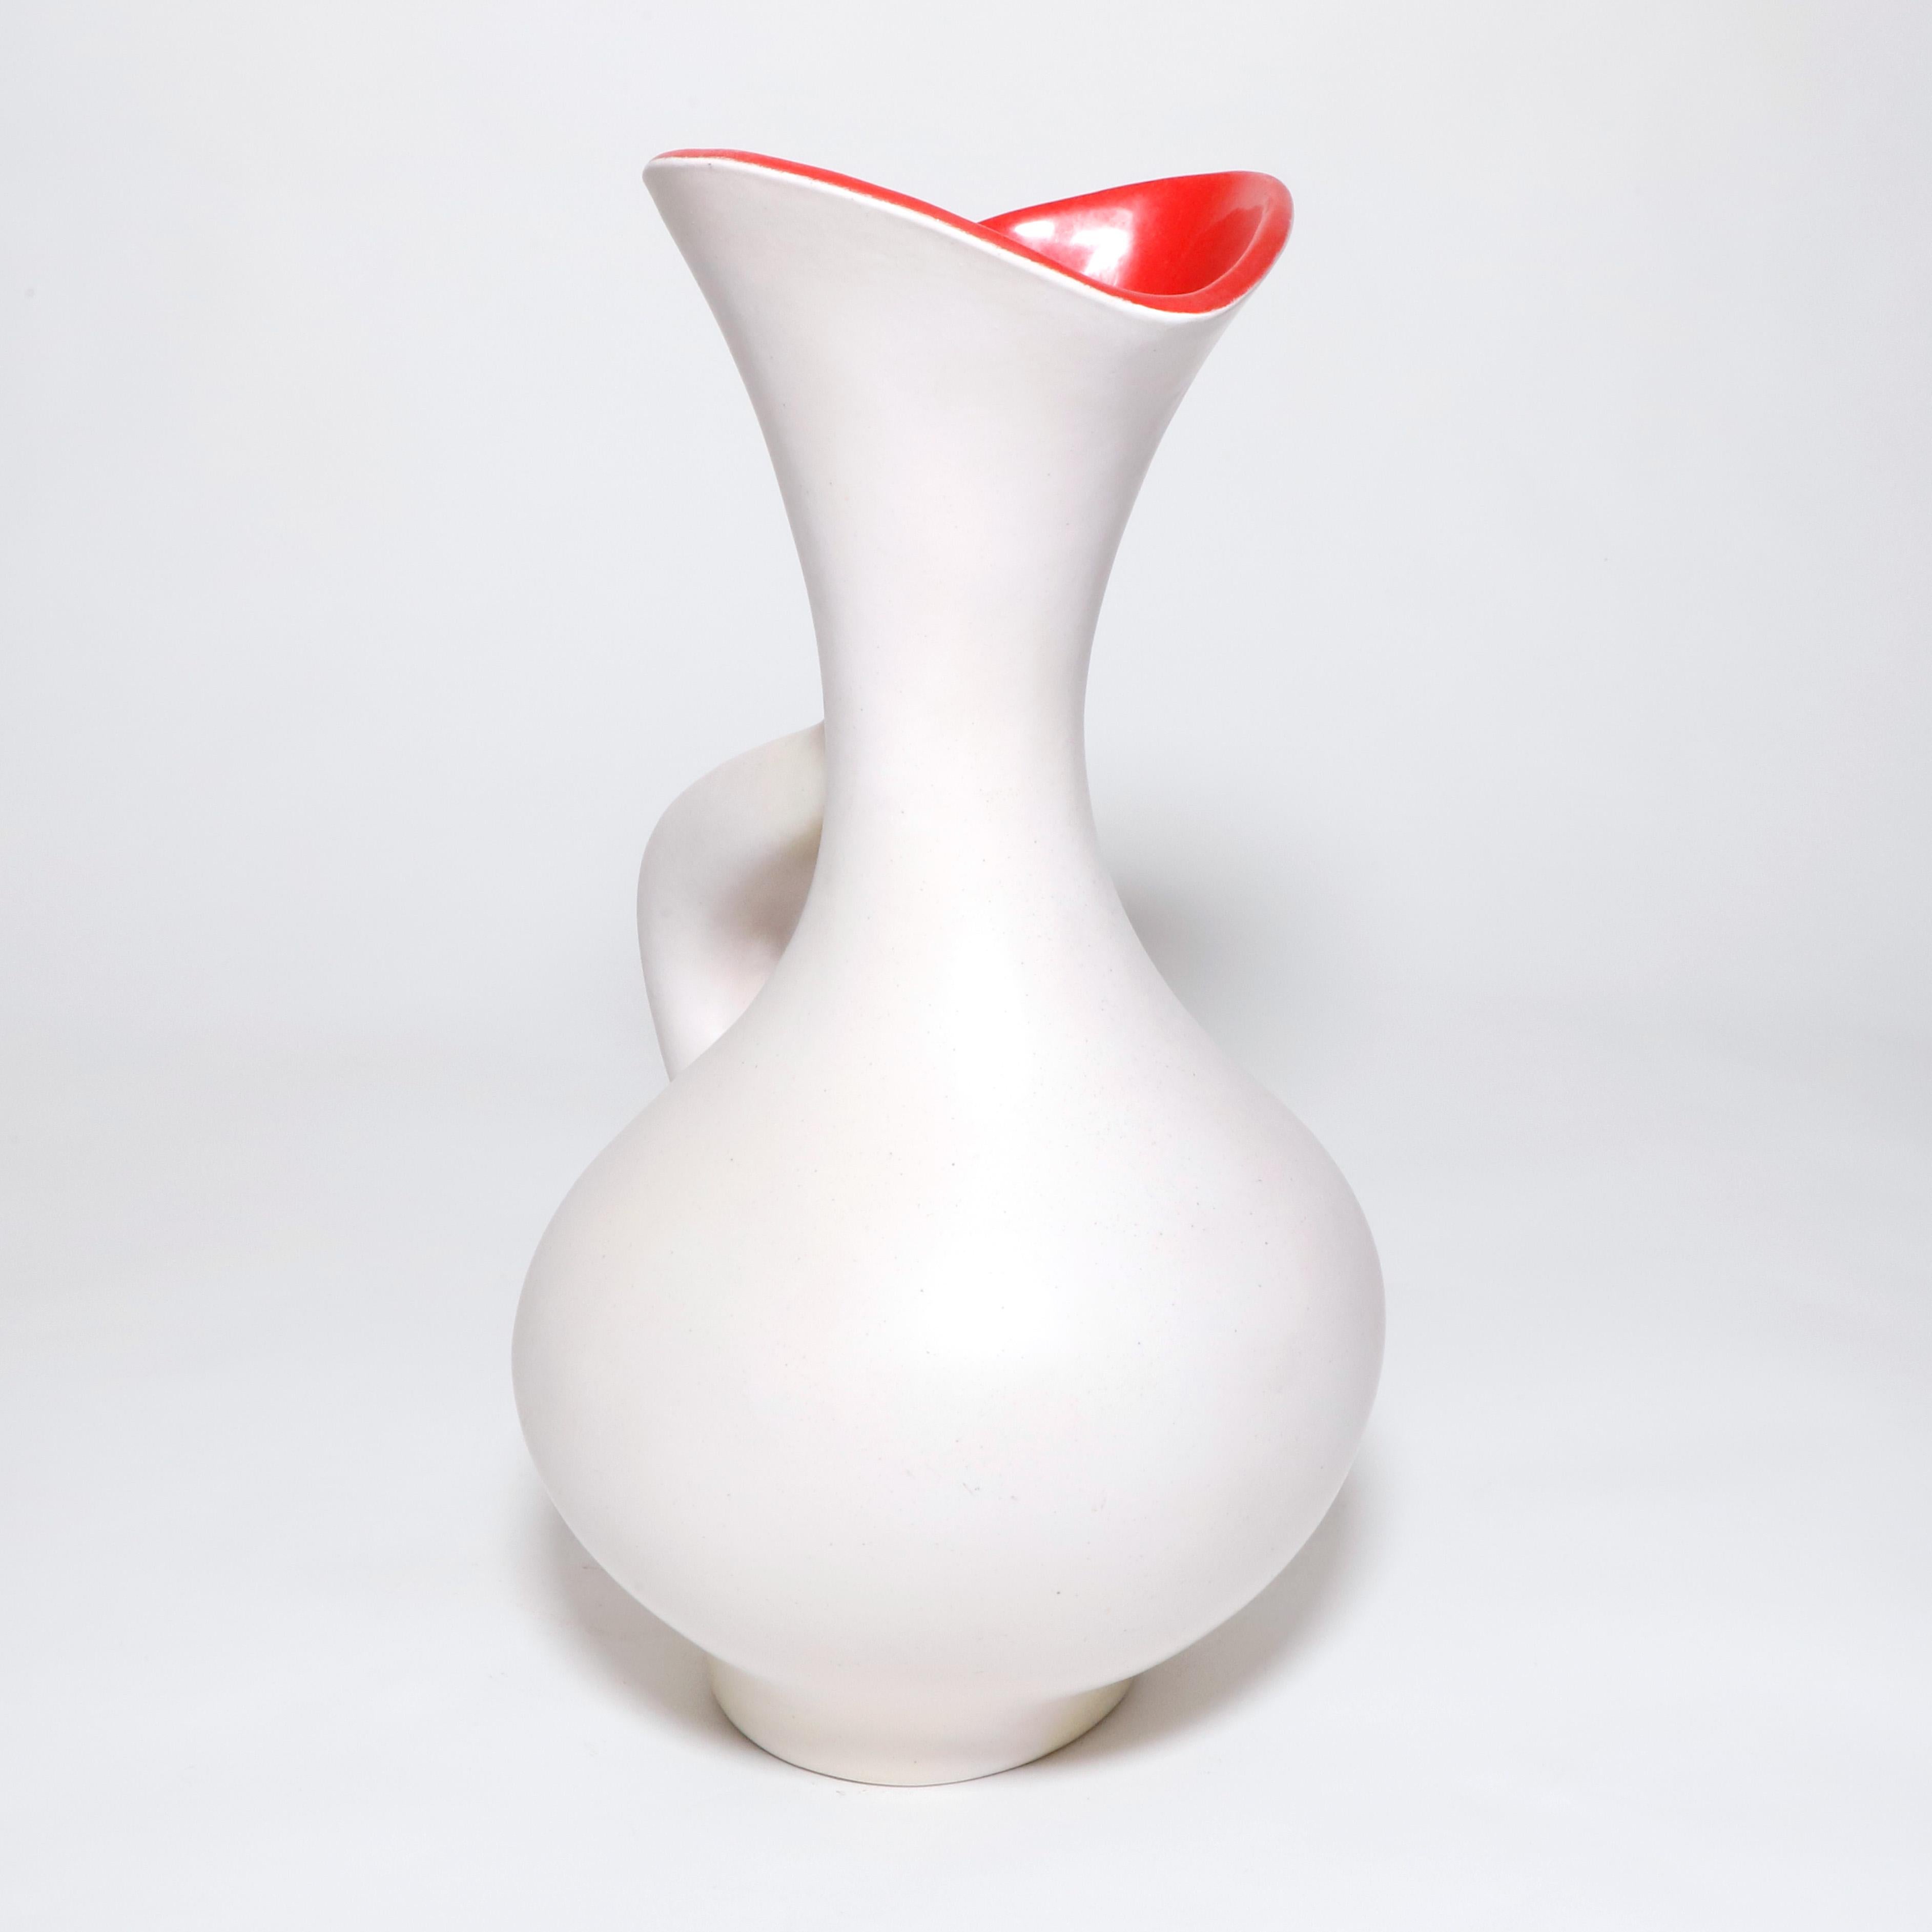 White ceramic earthenware vase with red glaze interior by the French sculptor Pol Chambost. Made in 1956 this is the 894 model a unique shaped pitcher with intricate curves and handle with an elegant flared spout. Signed on bottom by the artist.